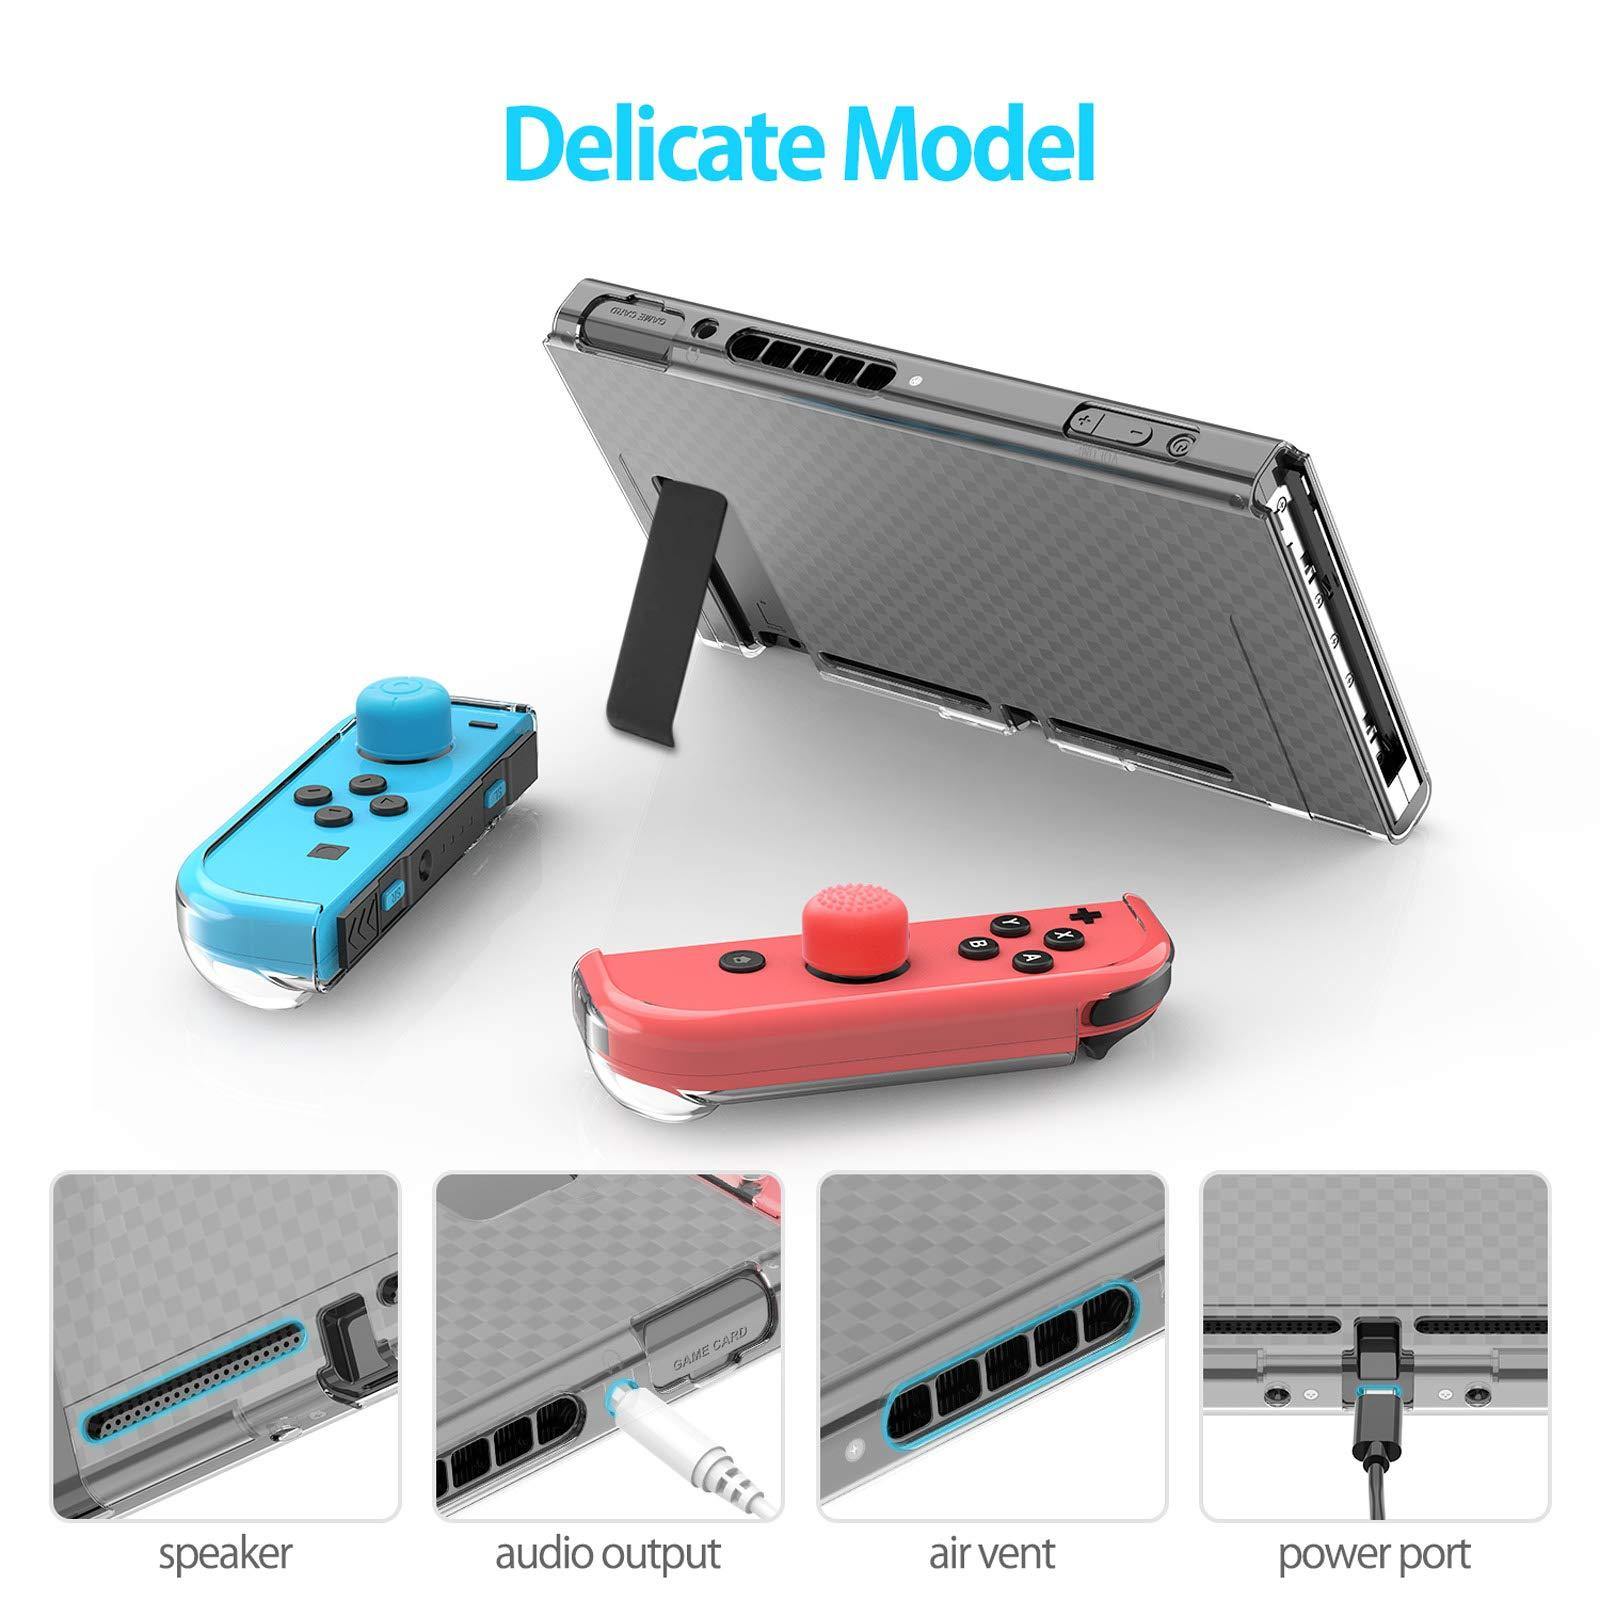 Dockable Clear Protective Case Cover for Nintendo Switch - HeysTop Online